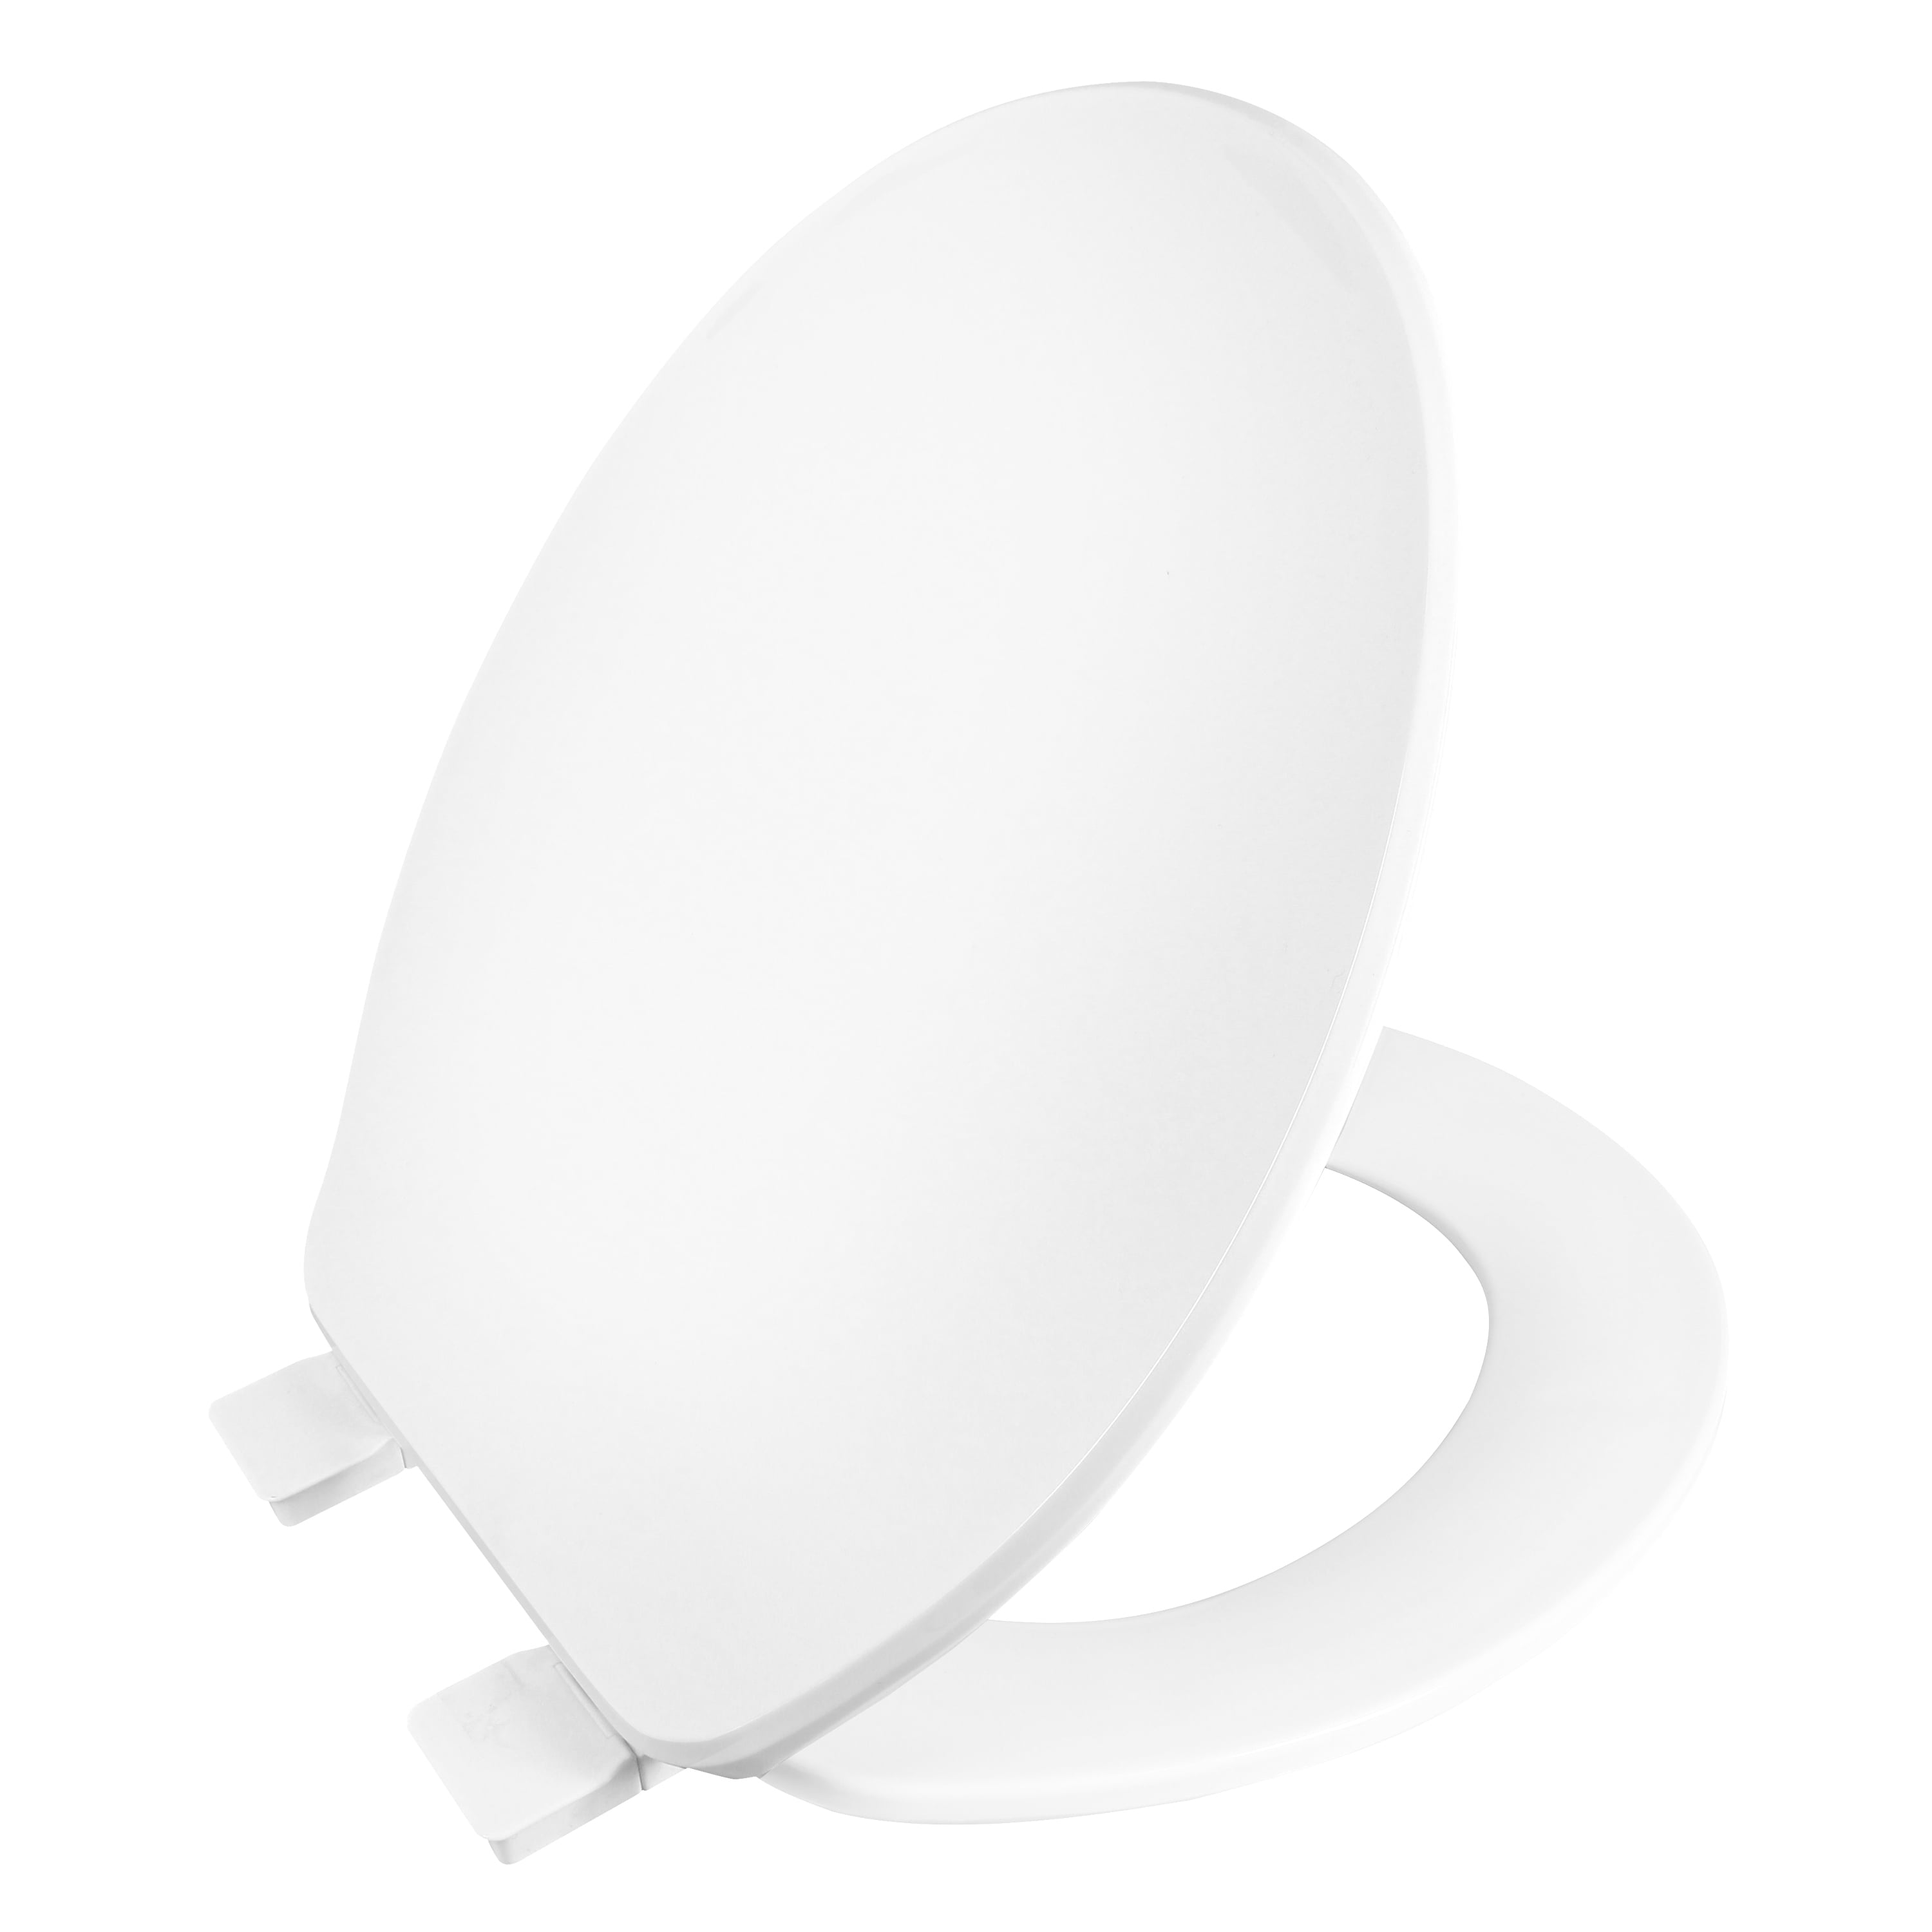 Aobo Square Toilet Seat Plastic Toilet Seat with Hinges, Easy to